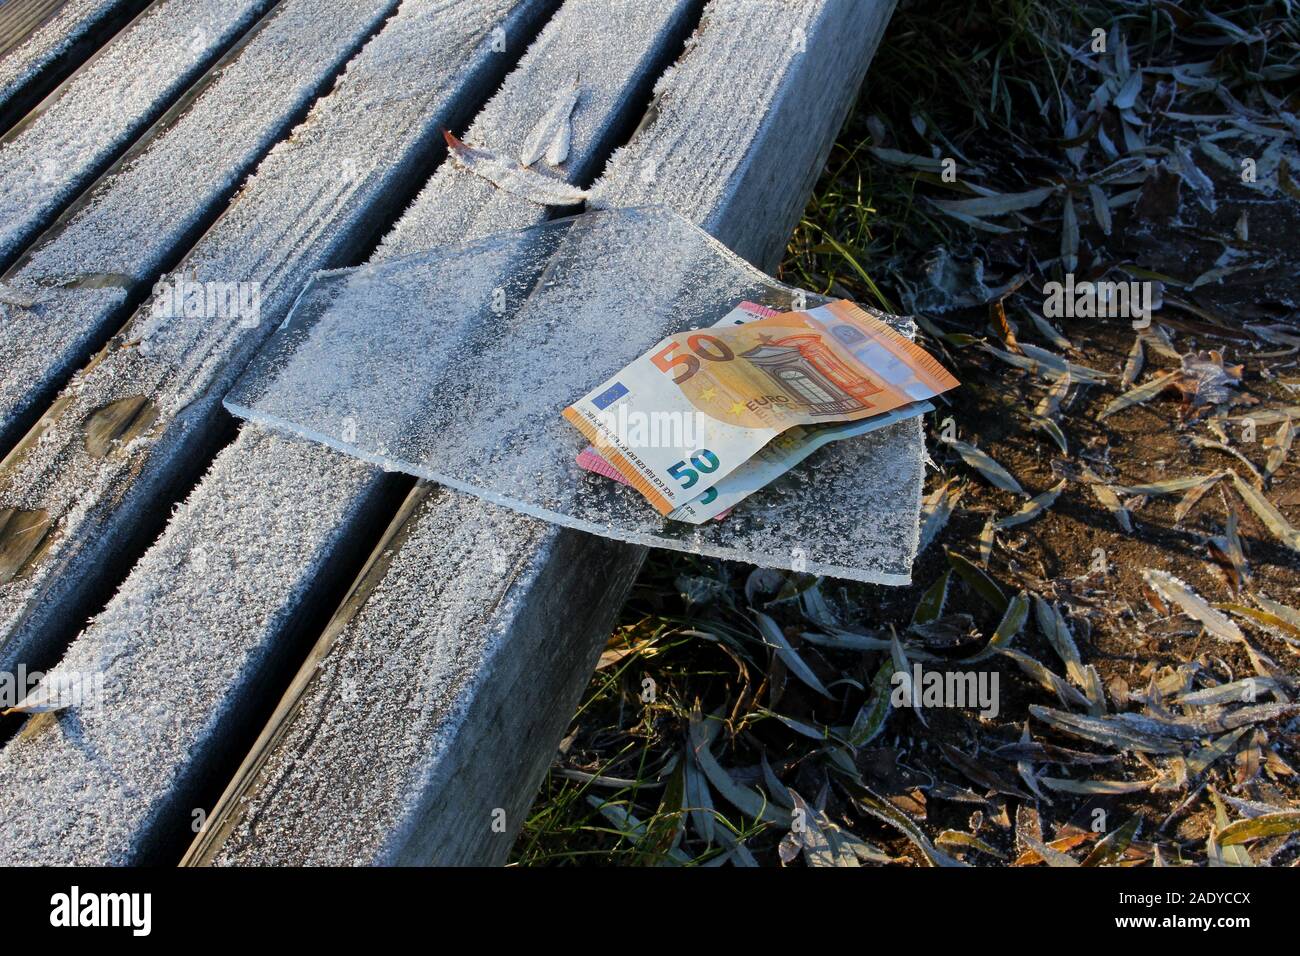 Money laying on a ice floe which is laying on the edge of the bench being melted by the sun, selected focus on the money Stock Photo